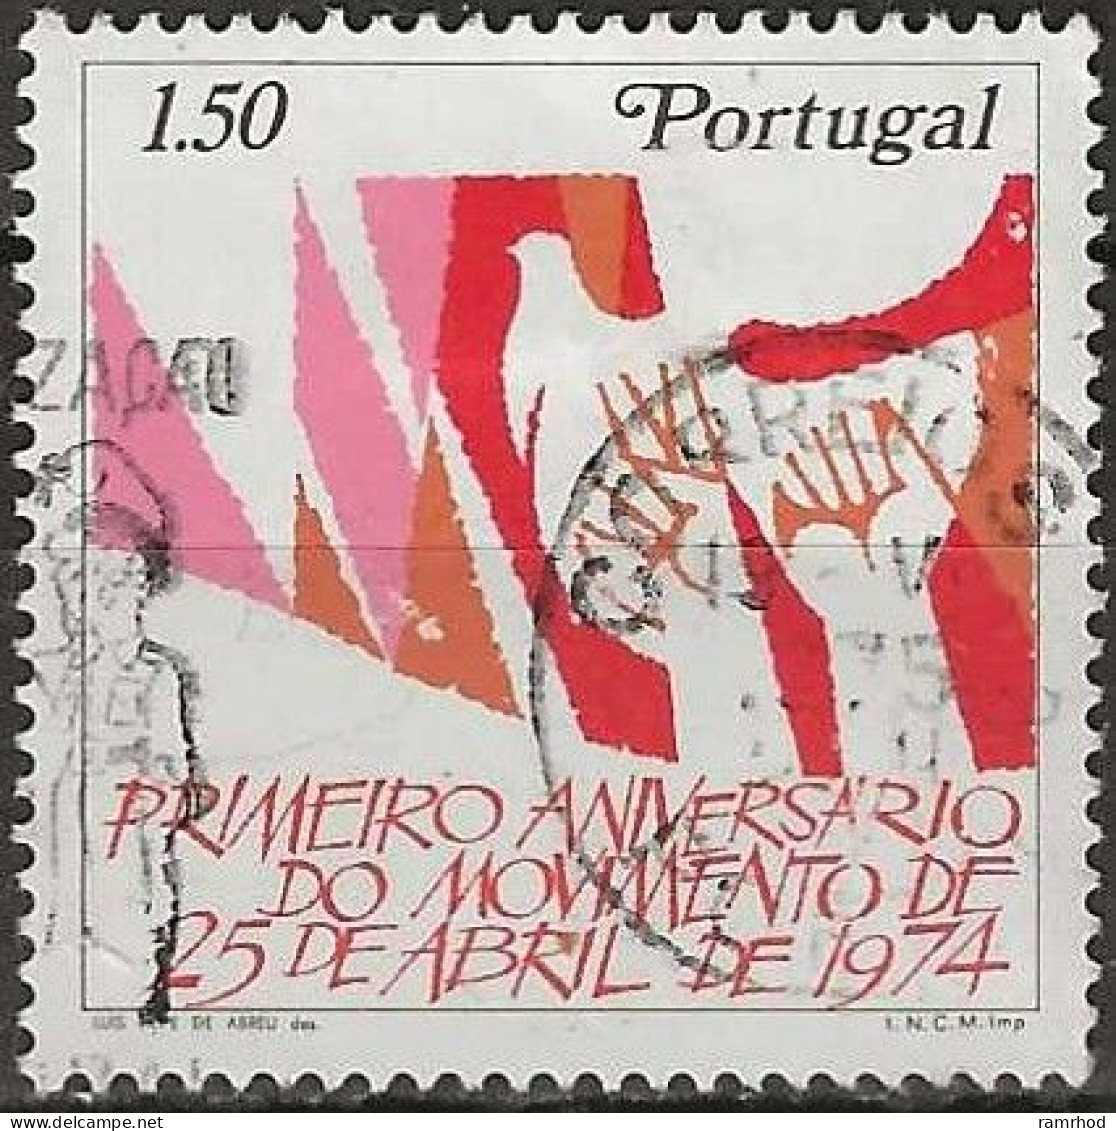 PORTUGAL 1975 1st Anniv Of Portuguese Revolution - 1e50 Hands And Dove Of Peace FU - Used Stamps